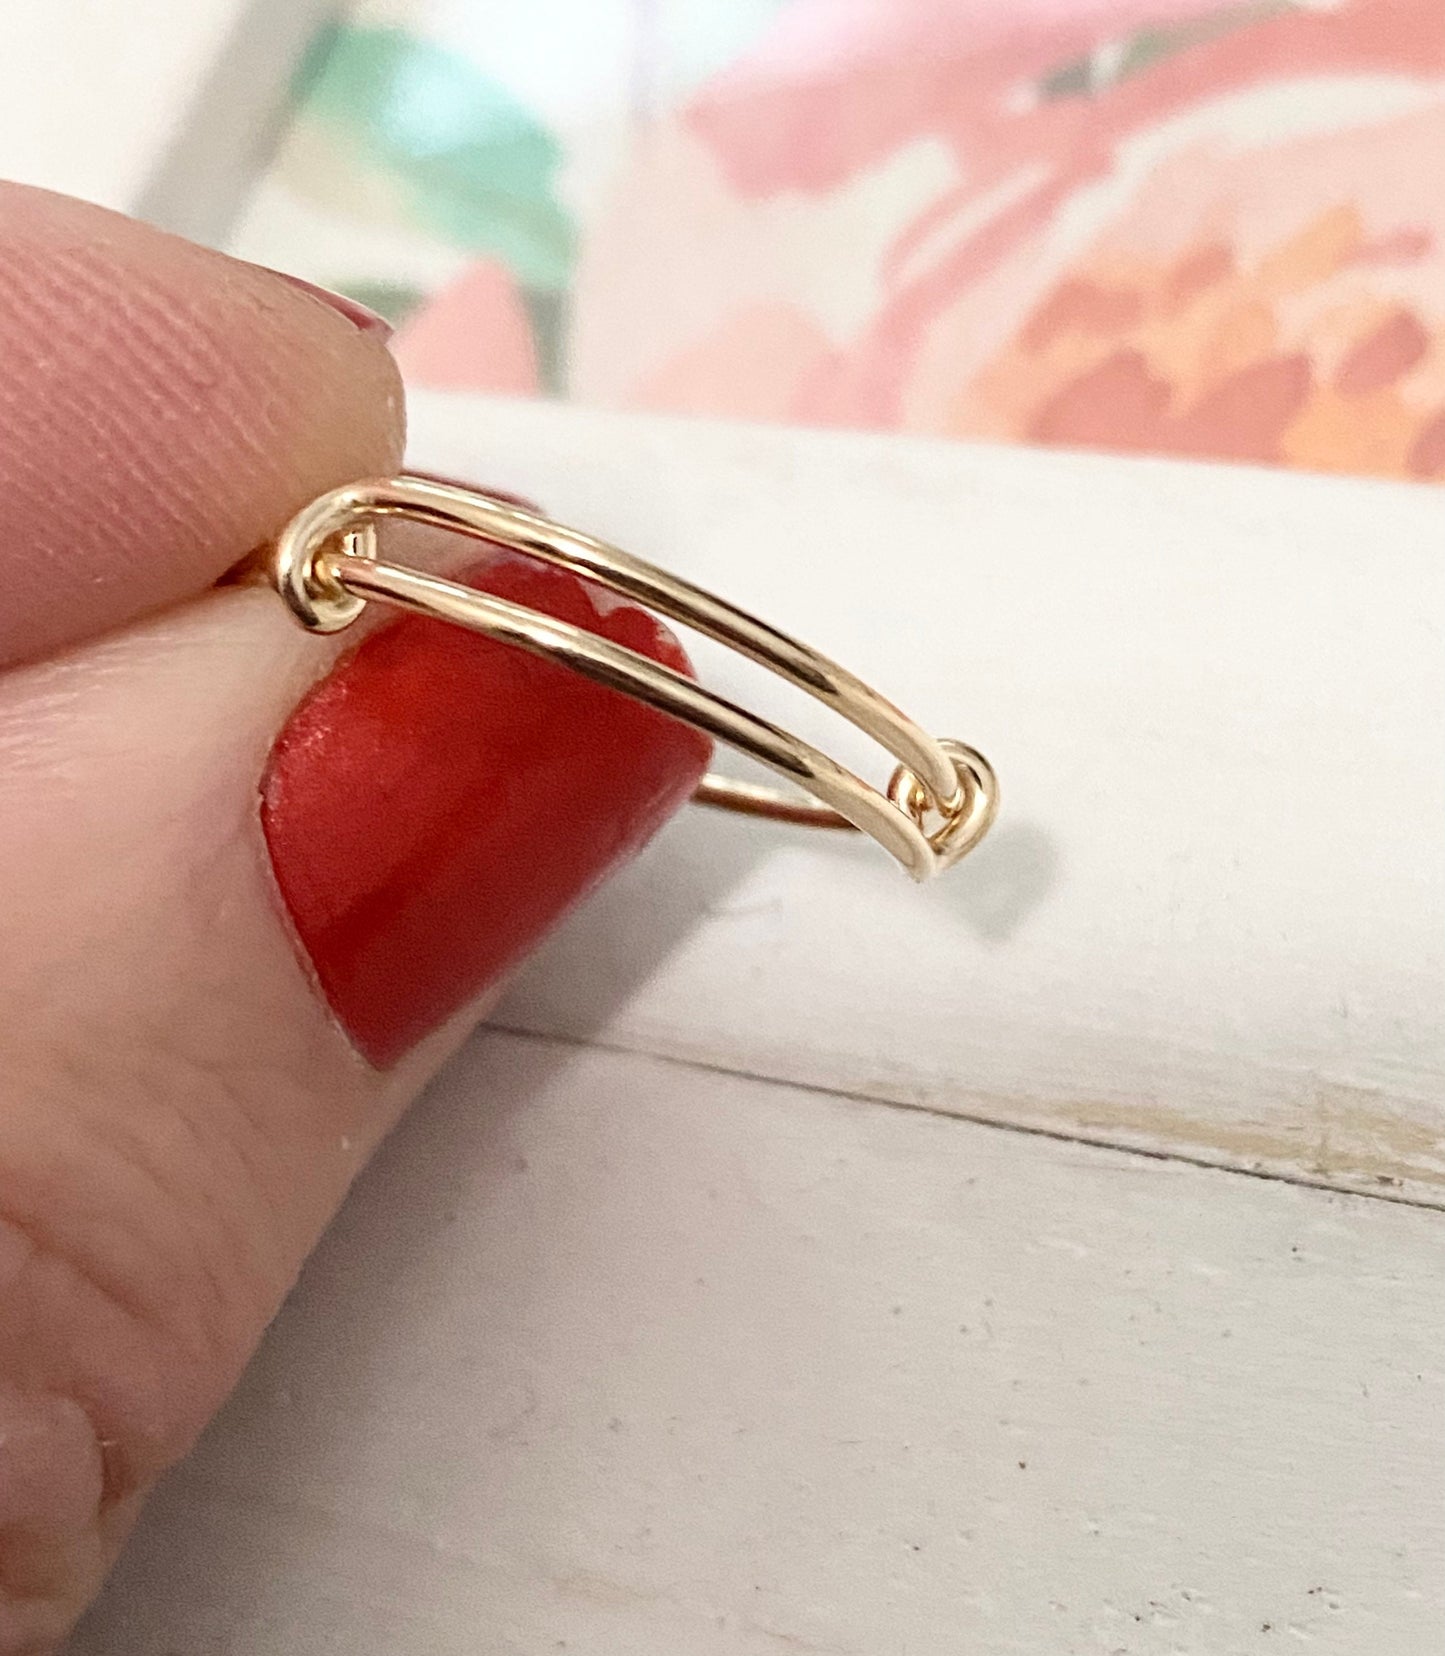 Gold Filled Ring Add a Charm Rings Expandable Adjustable Size 6 7 8 Jewelry Maker